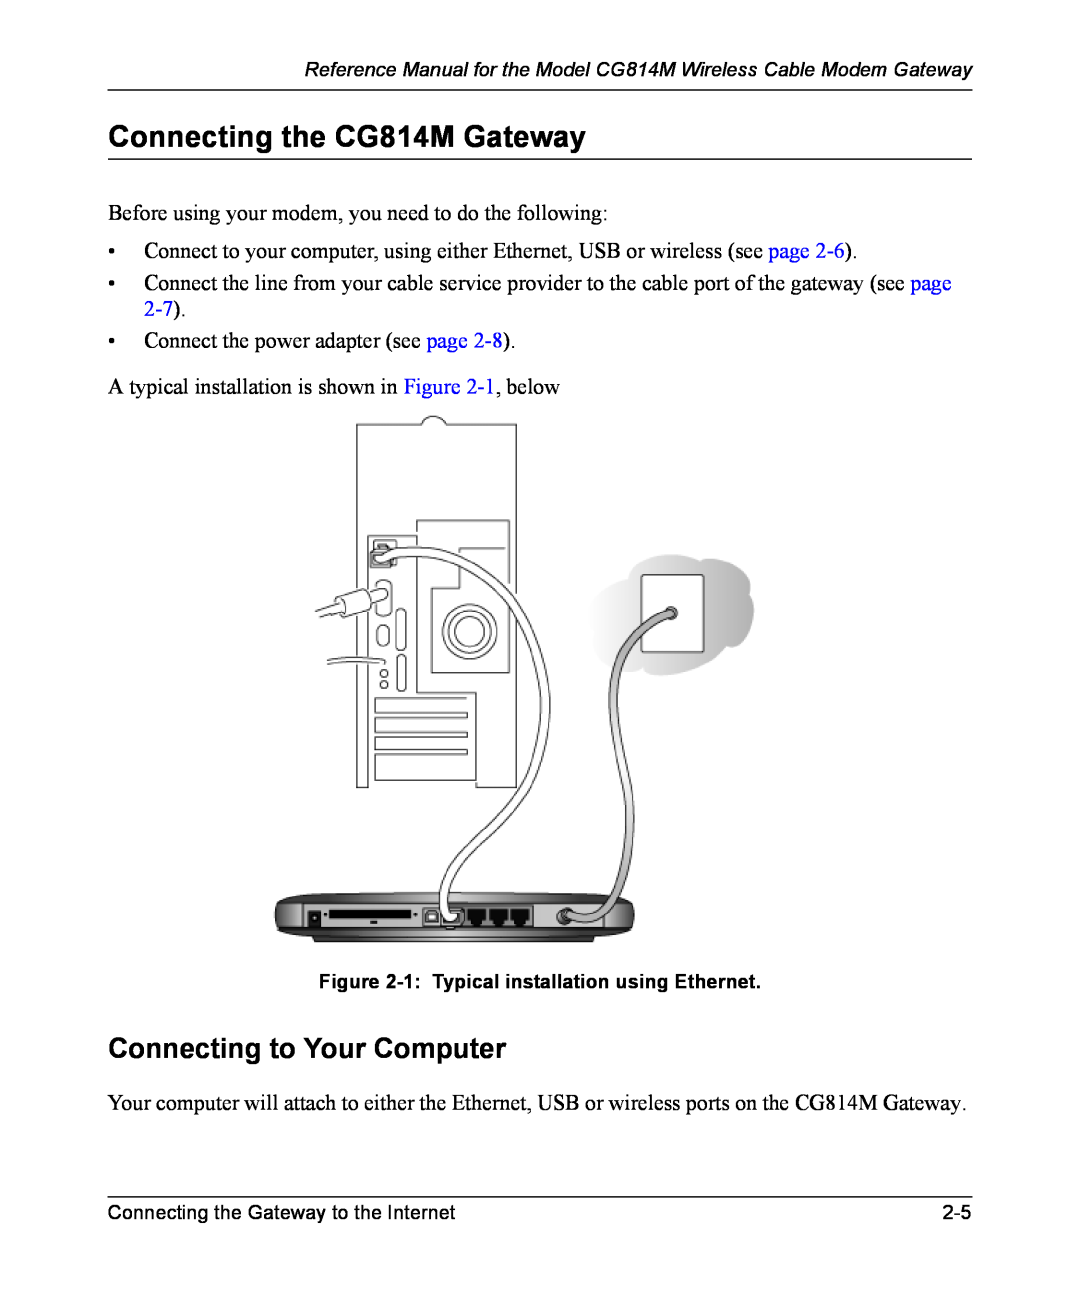 NETGEAR manual Connecting the CG814M Gateway, Connecting to Your Computer 